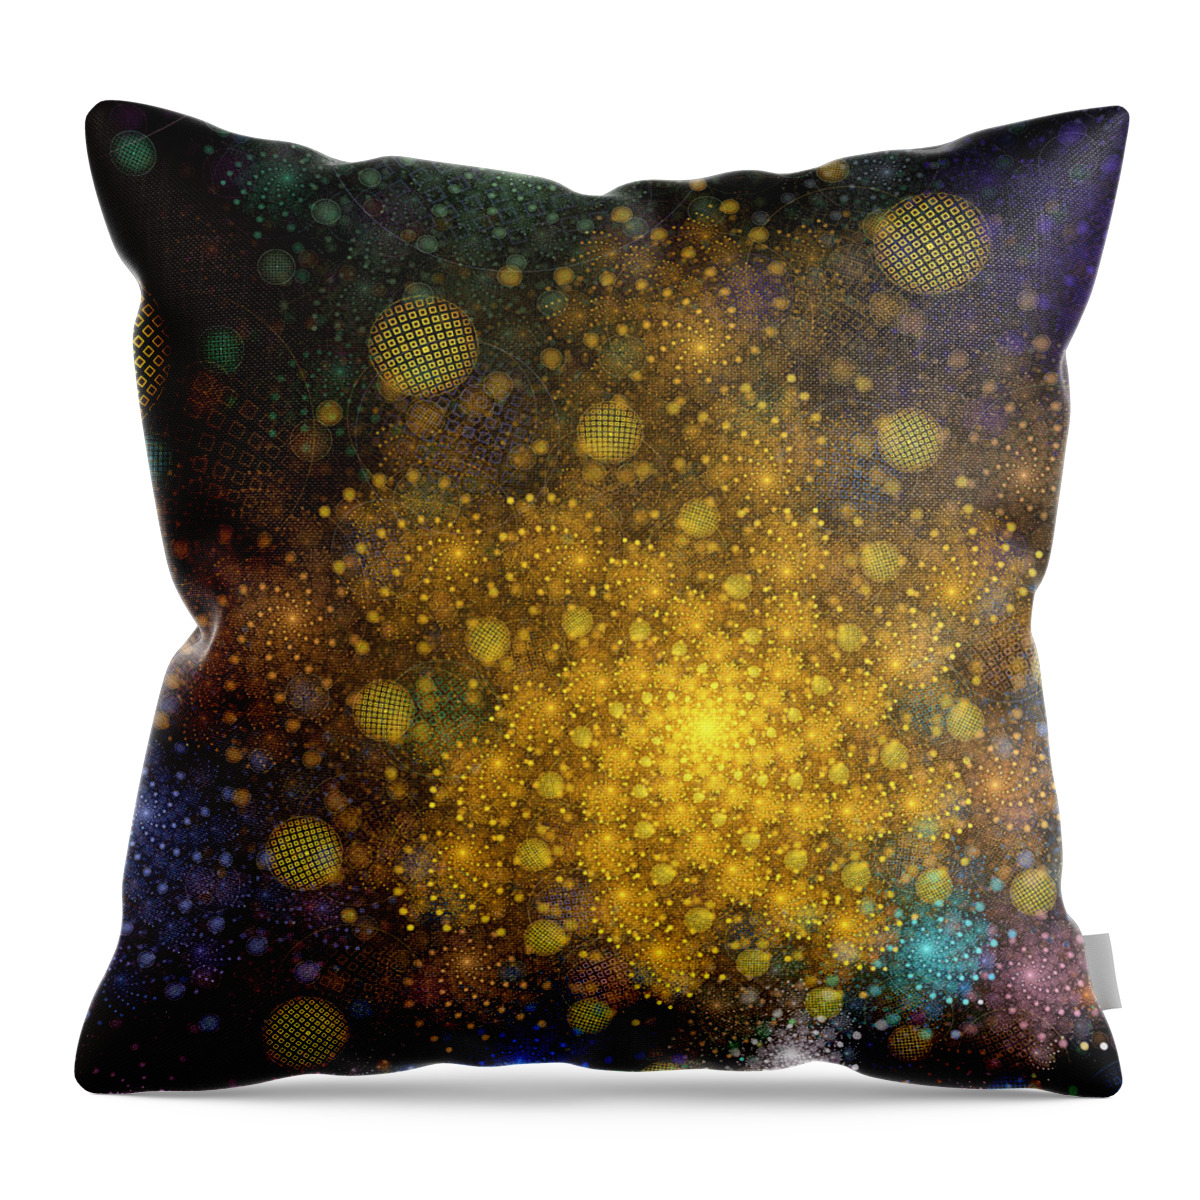 Vic Eberly Throw Pillow featuring the digital art Bursting With Joy by Vic Eberly